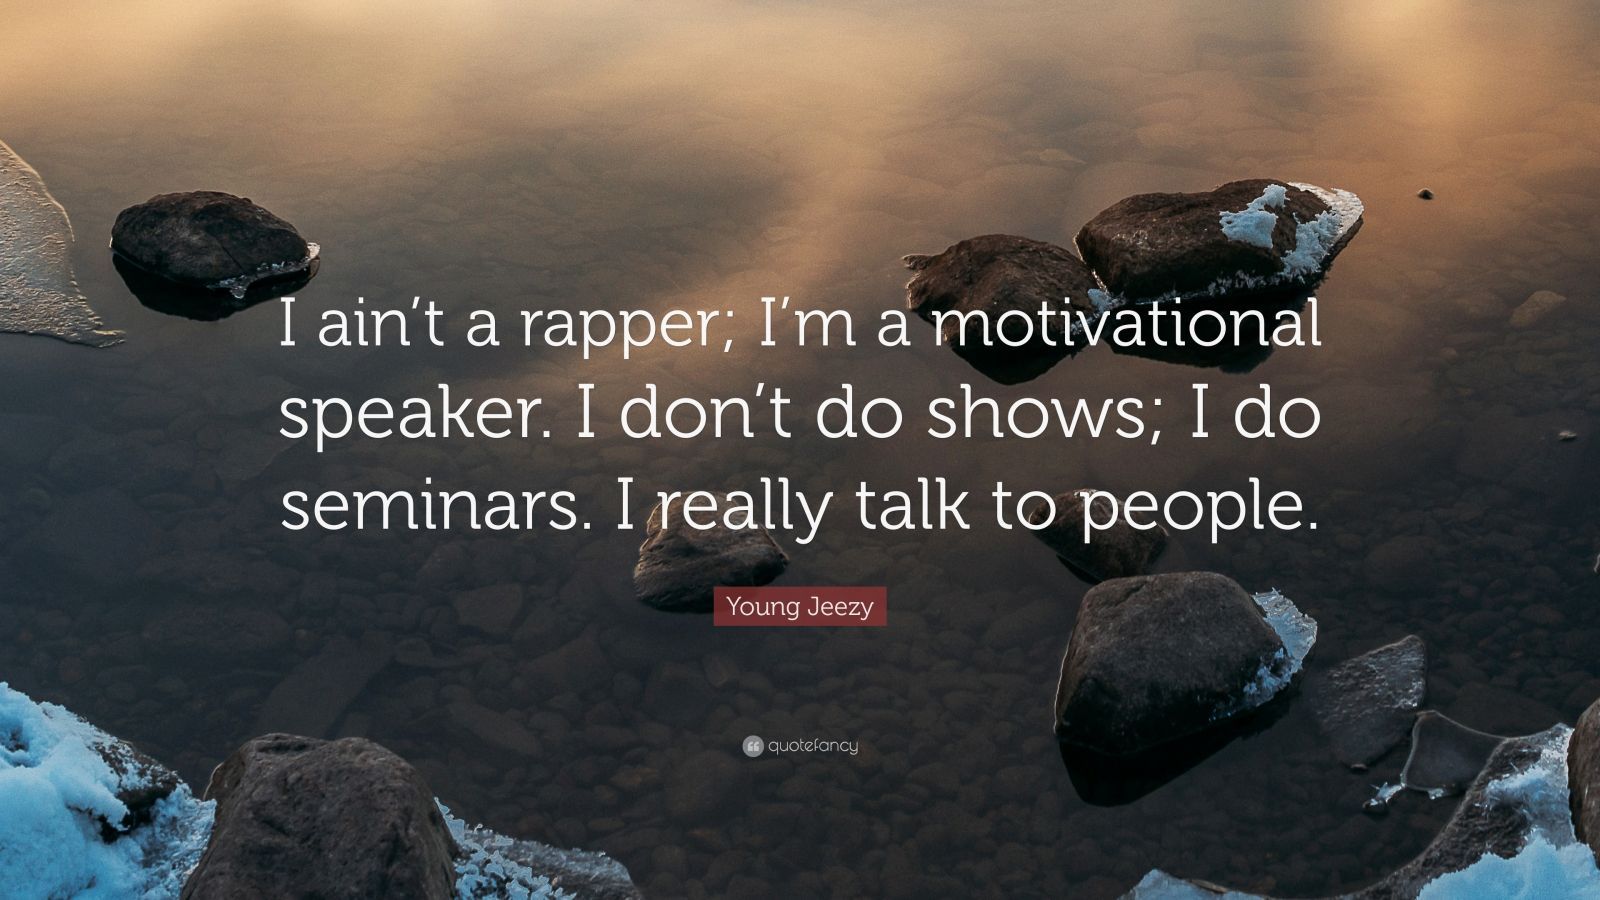 Young Jeezy Quote: “I ain't a rapper; I'm a motivational speaker. I don't do shows; I do seminars. I really talk to people.”